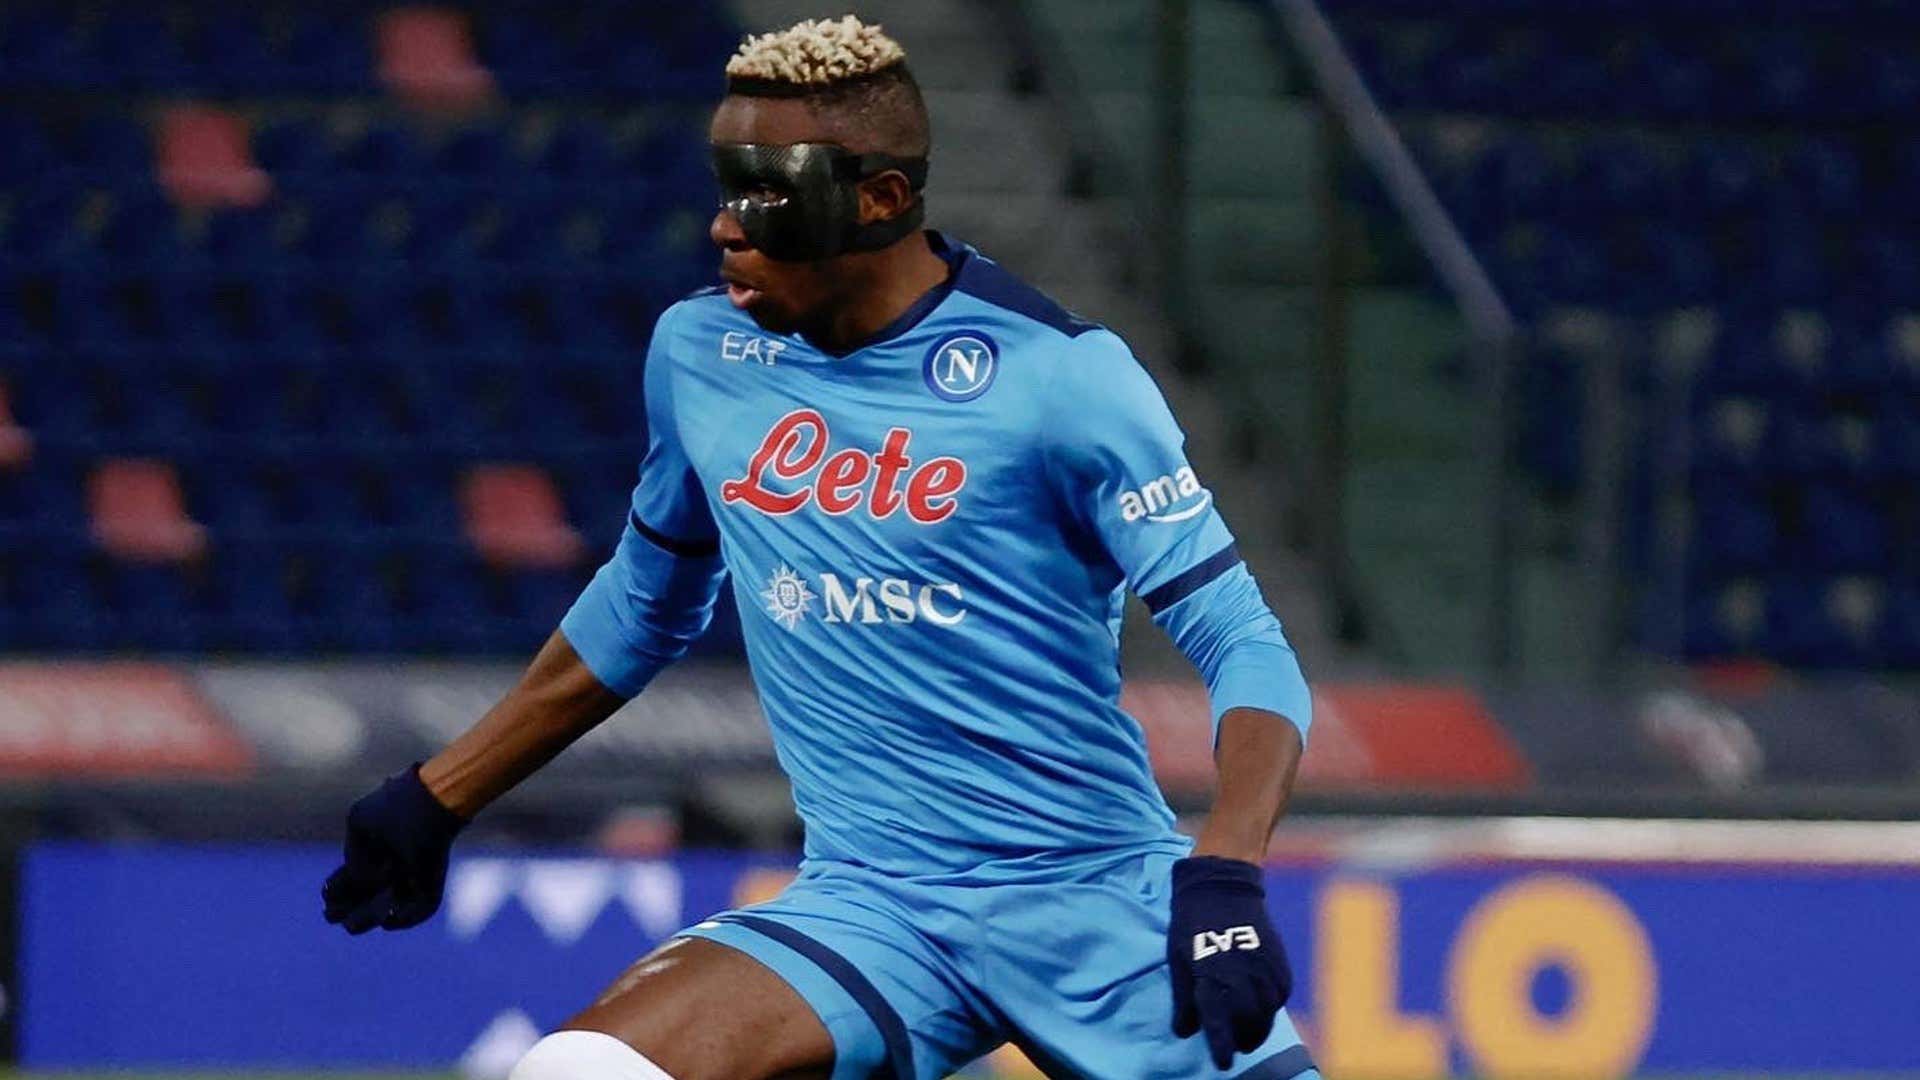 Victor Osimhen of Nigeria and Napoli.